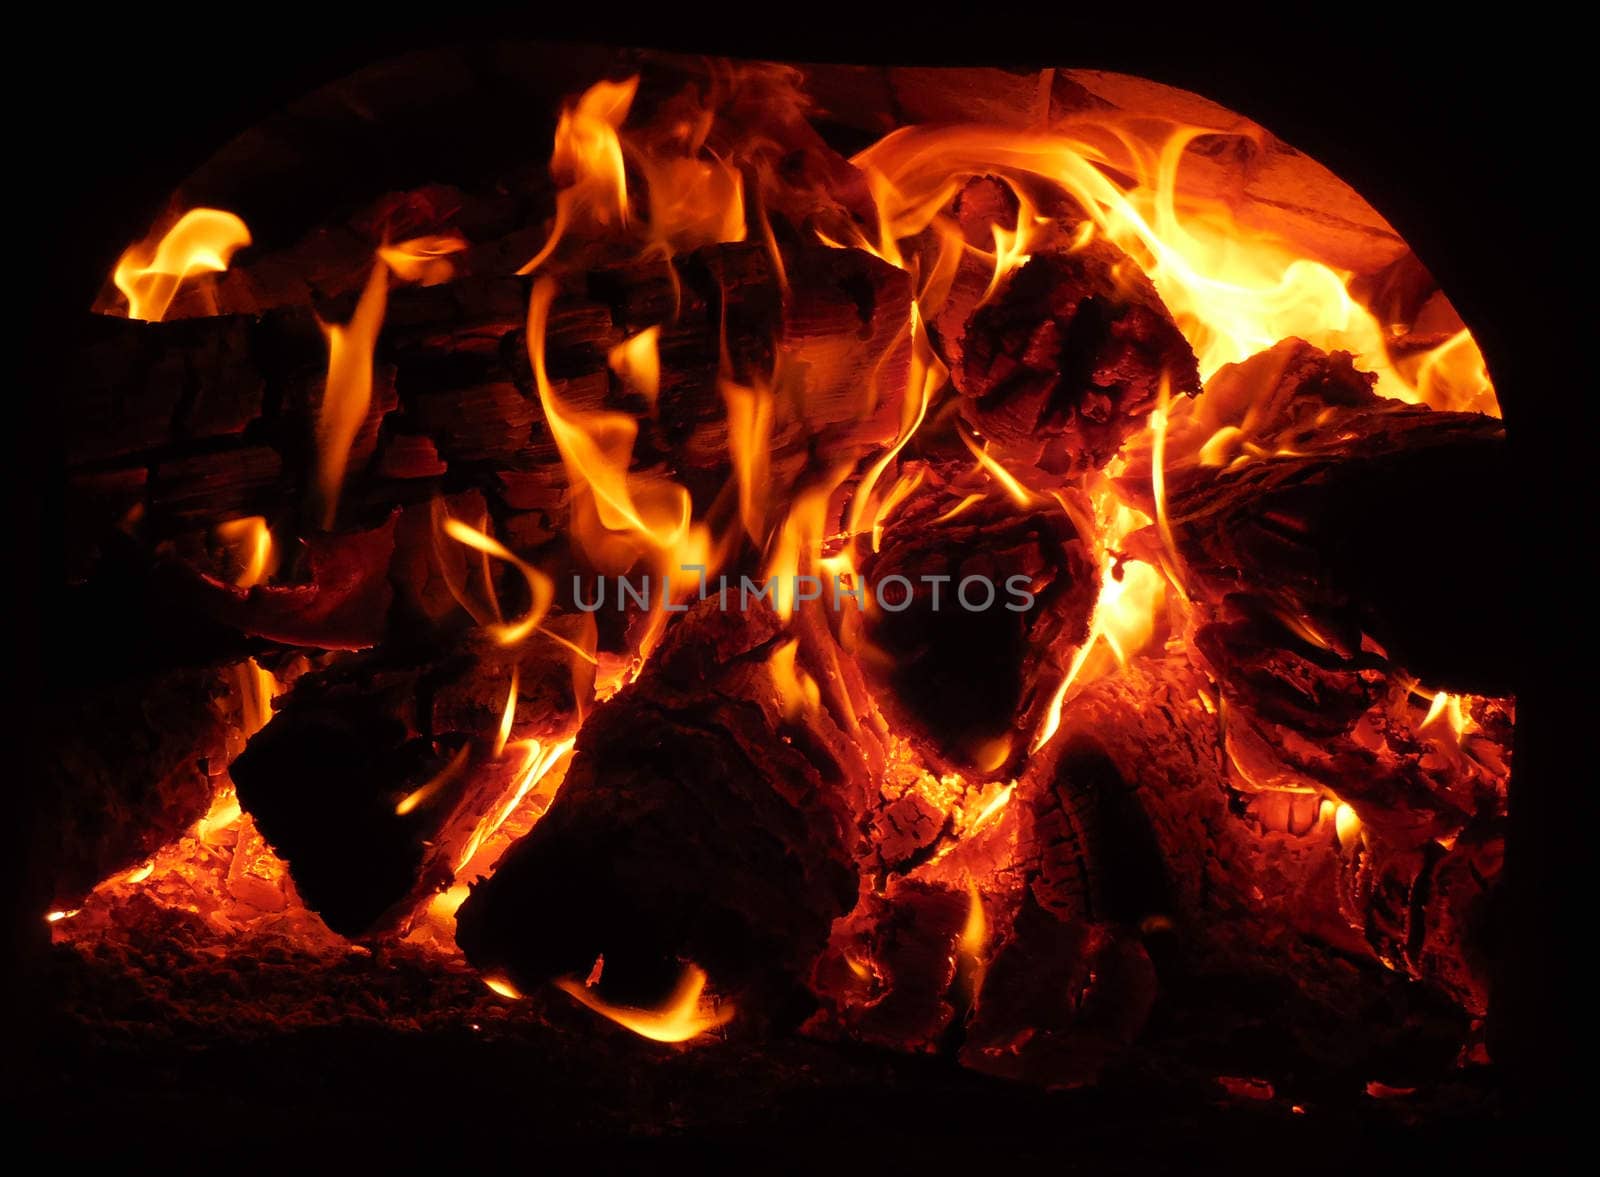 embers and the fire in the stove in Russian Karelia, February, 2015